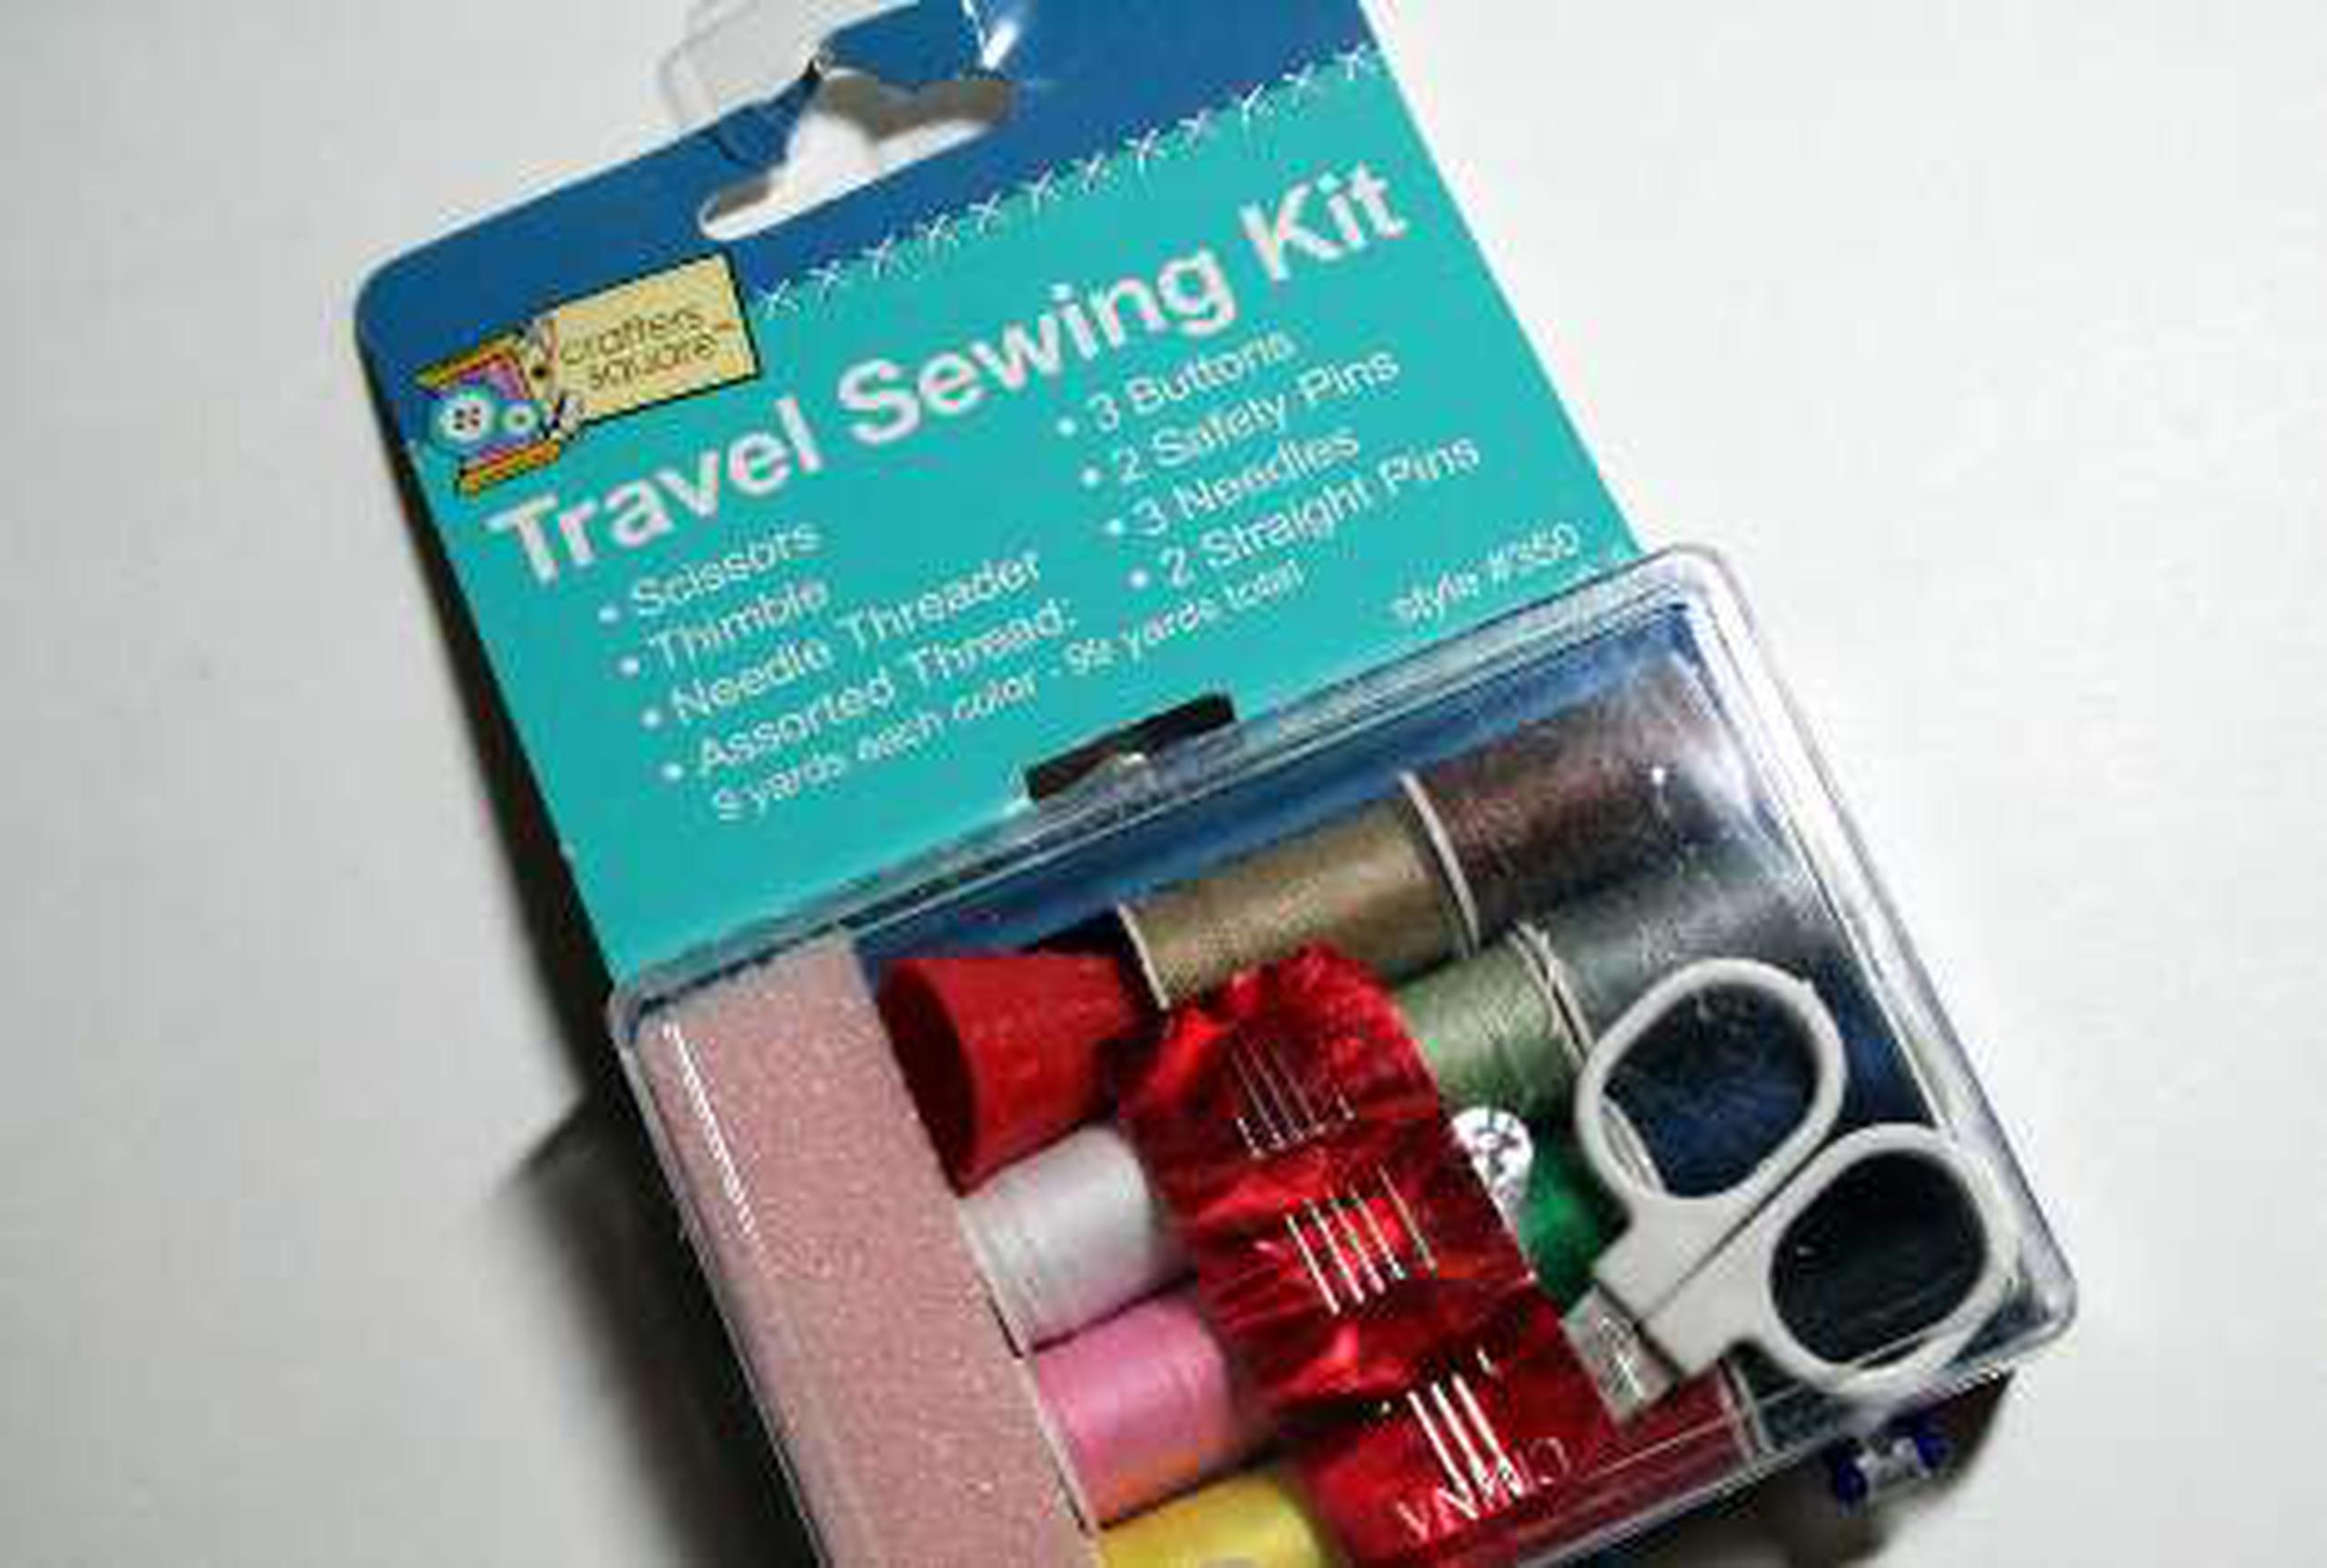 Allary Travel Sewing Kit